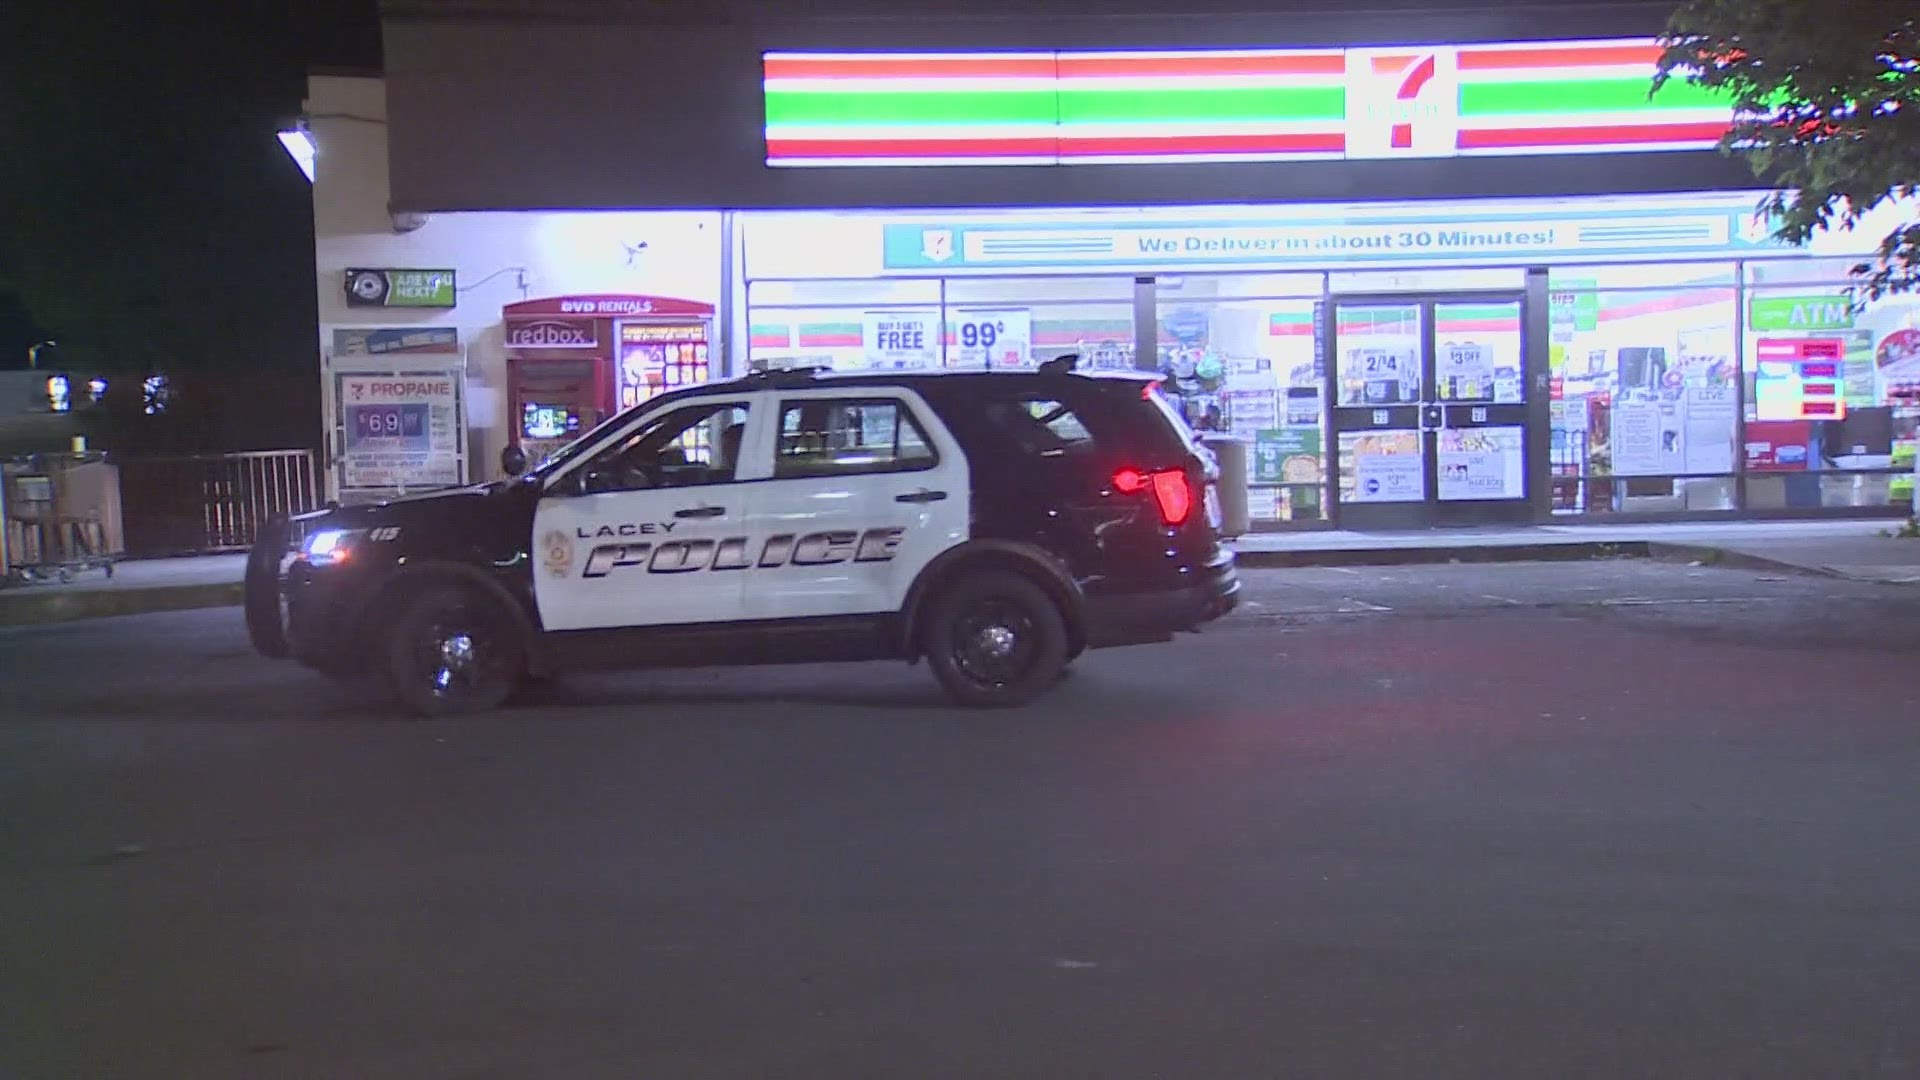 A recent trend of 24-hour convenience store robberies continues with two 7-Eleven locations in Thurston County hit early Tuesday morning